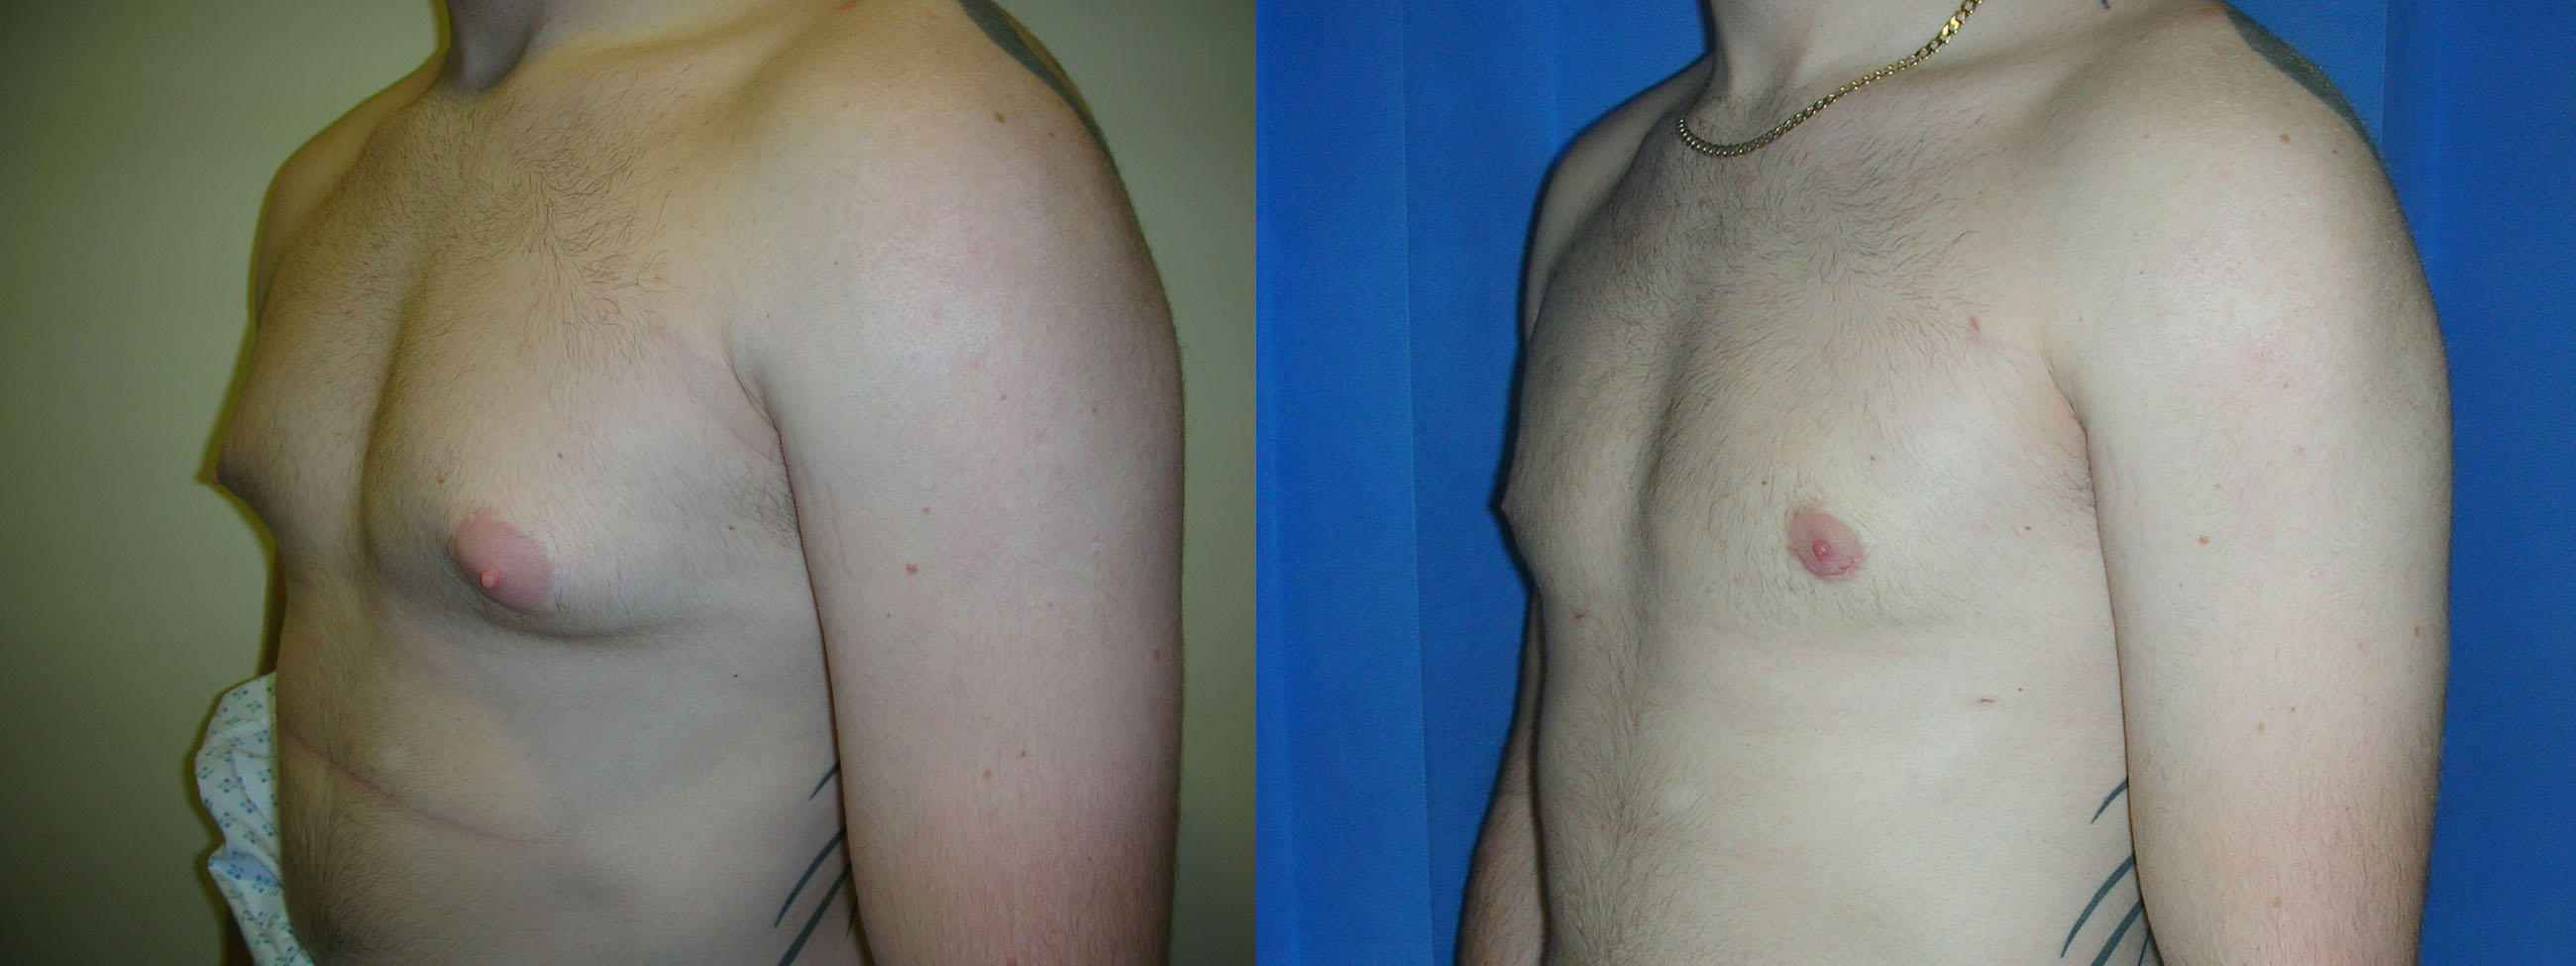 Male chest reduction surgery in Manchester and London